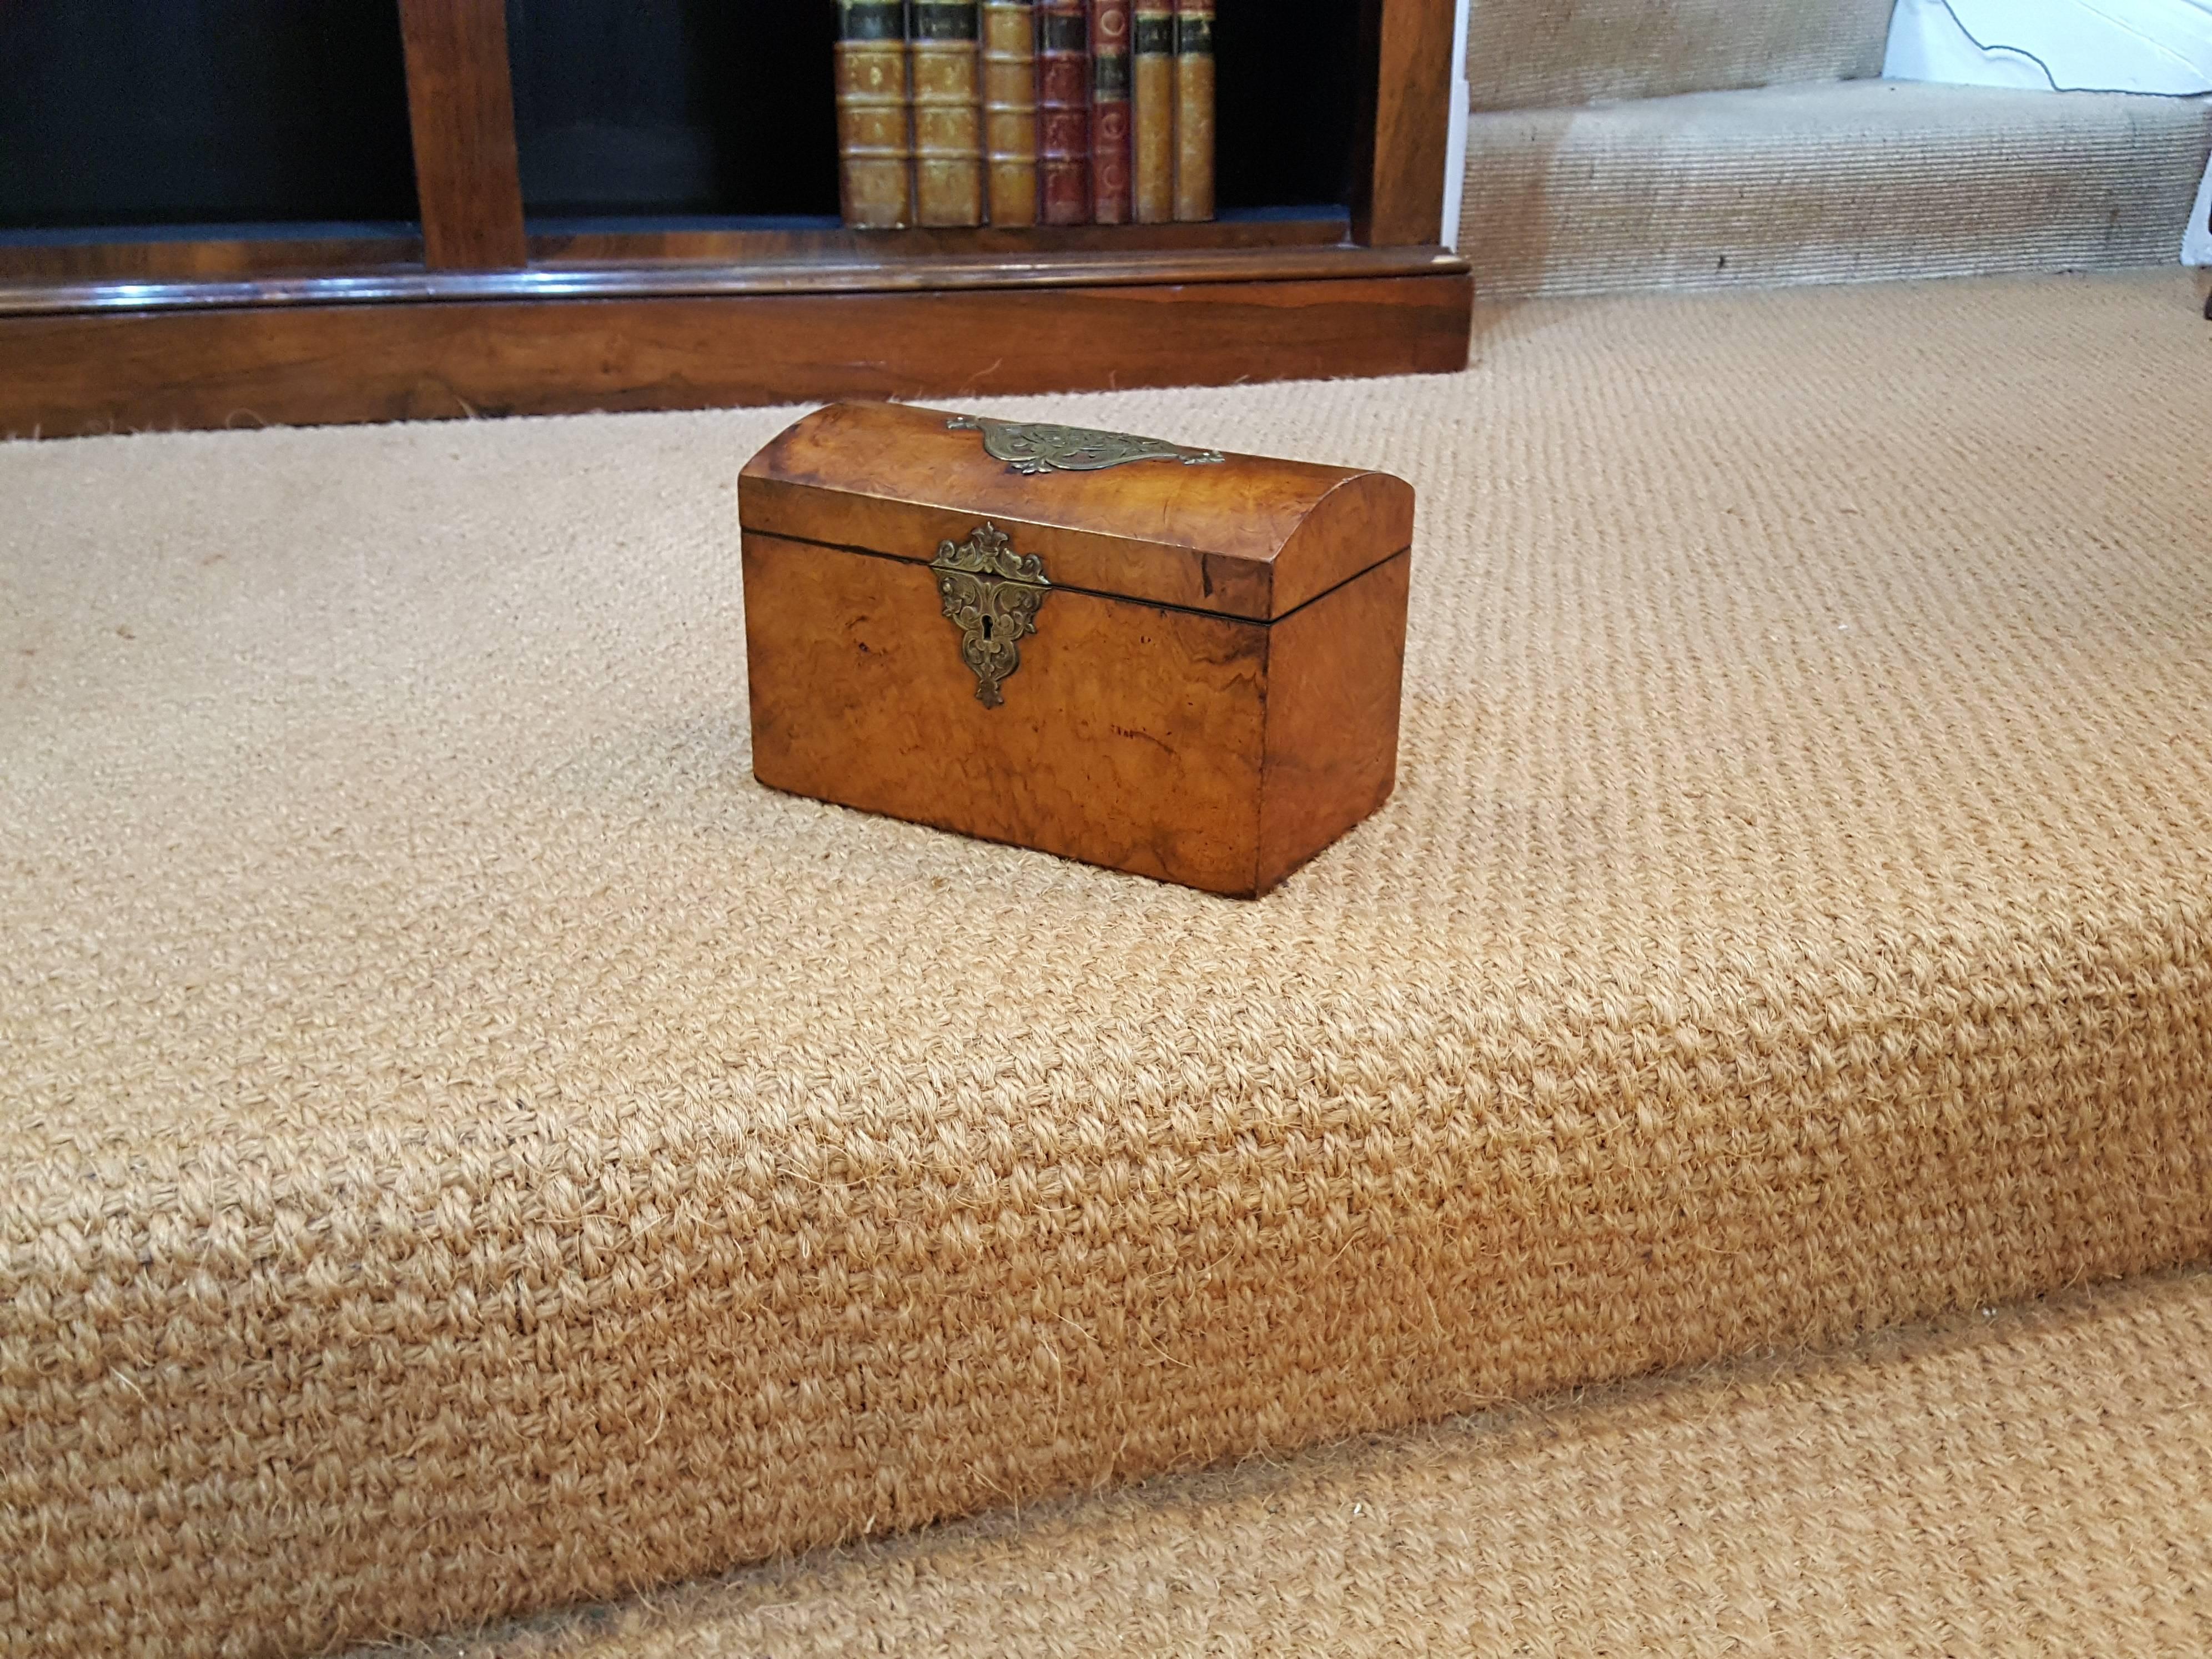 Regency burr yew tea caddy with brass decoration and lined compartments. Pearce of Corn bill Street, London. Measures: 9